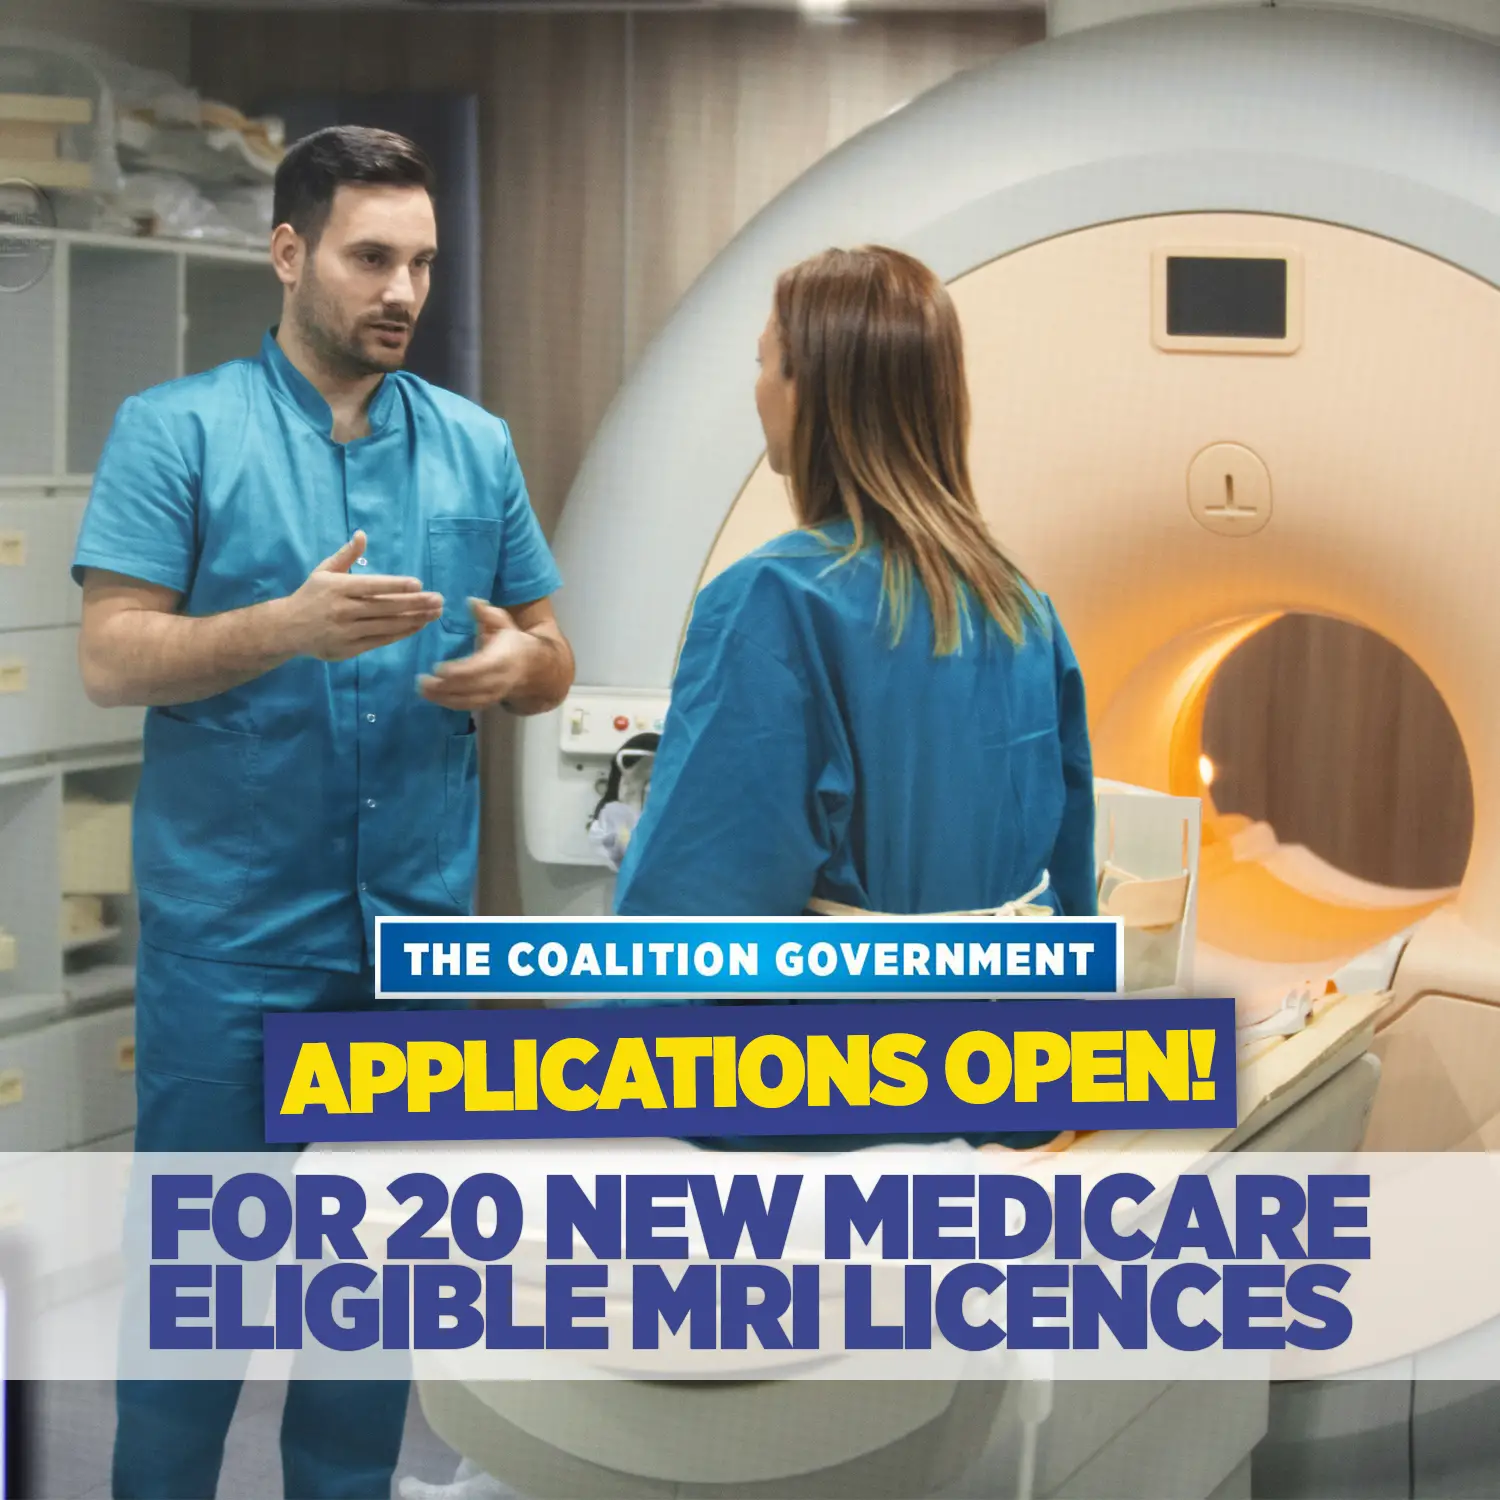 APPLICATIONS OPEN FOR NEW MRI LICENCES